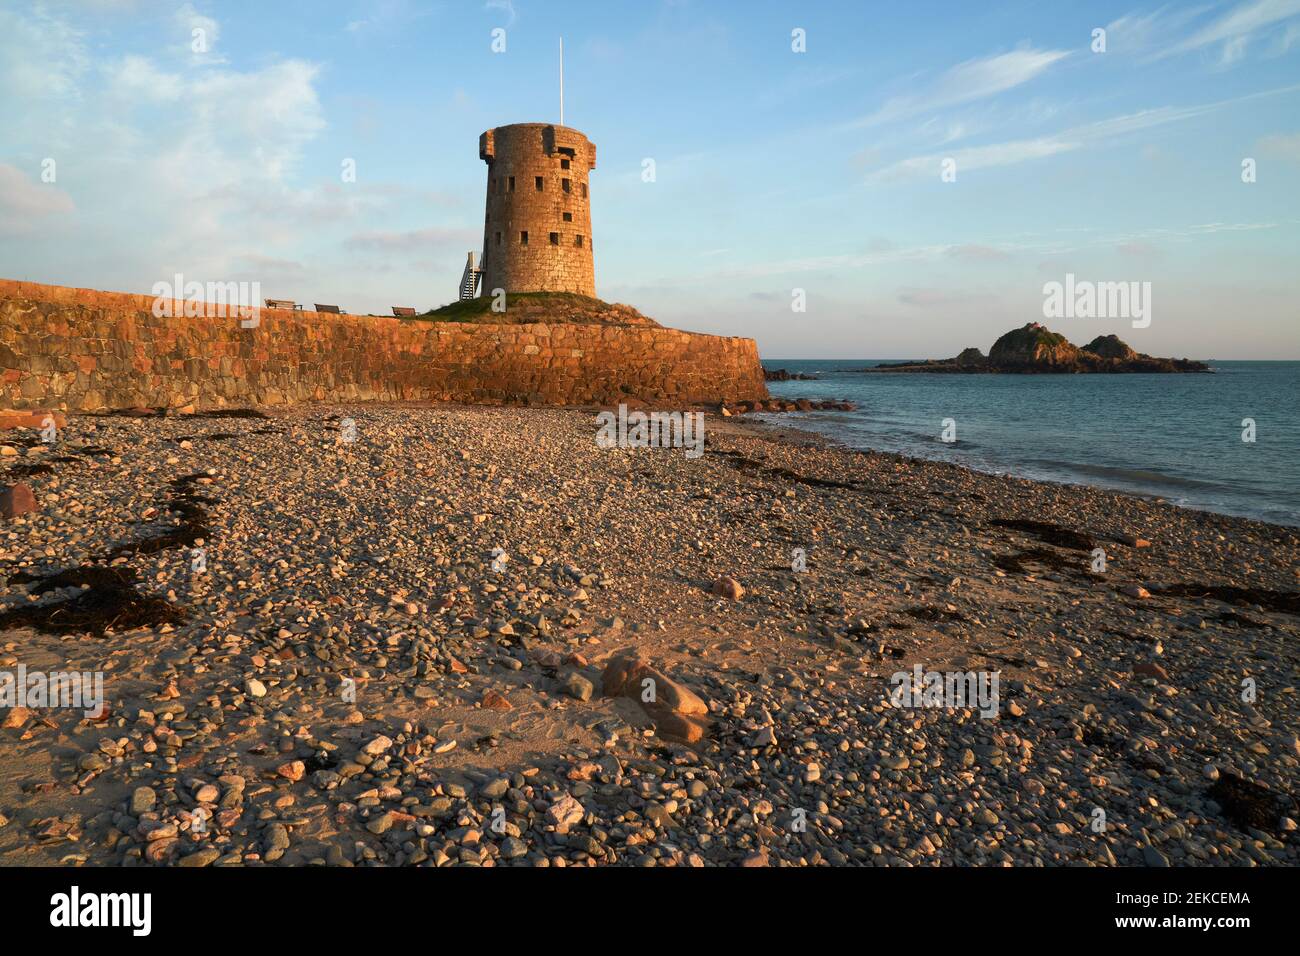 Le Hocq tower in Jersey, one of the Channel Islands. The tower was built in 1781 to defend against invasion from the sea. Stock Photo